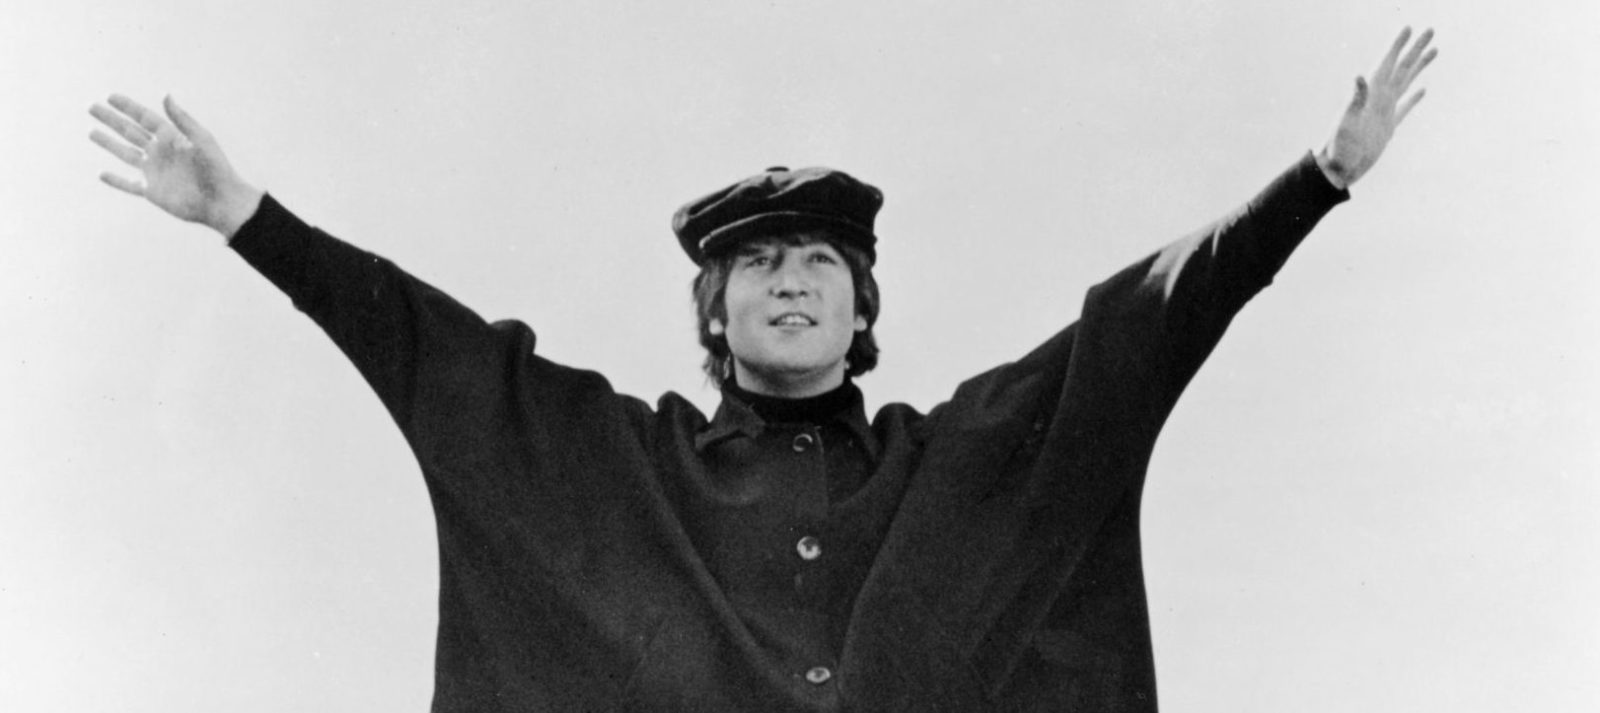 The Beatles and John Lennon memorabilia will be auctioned as NFTs